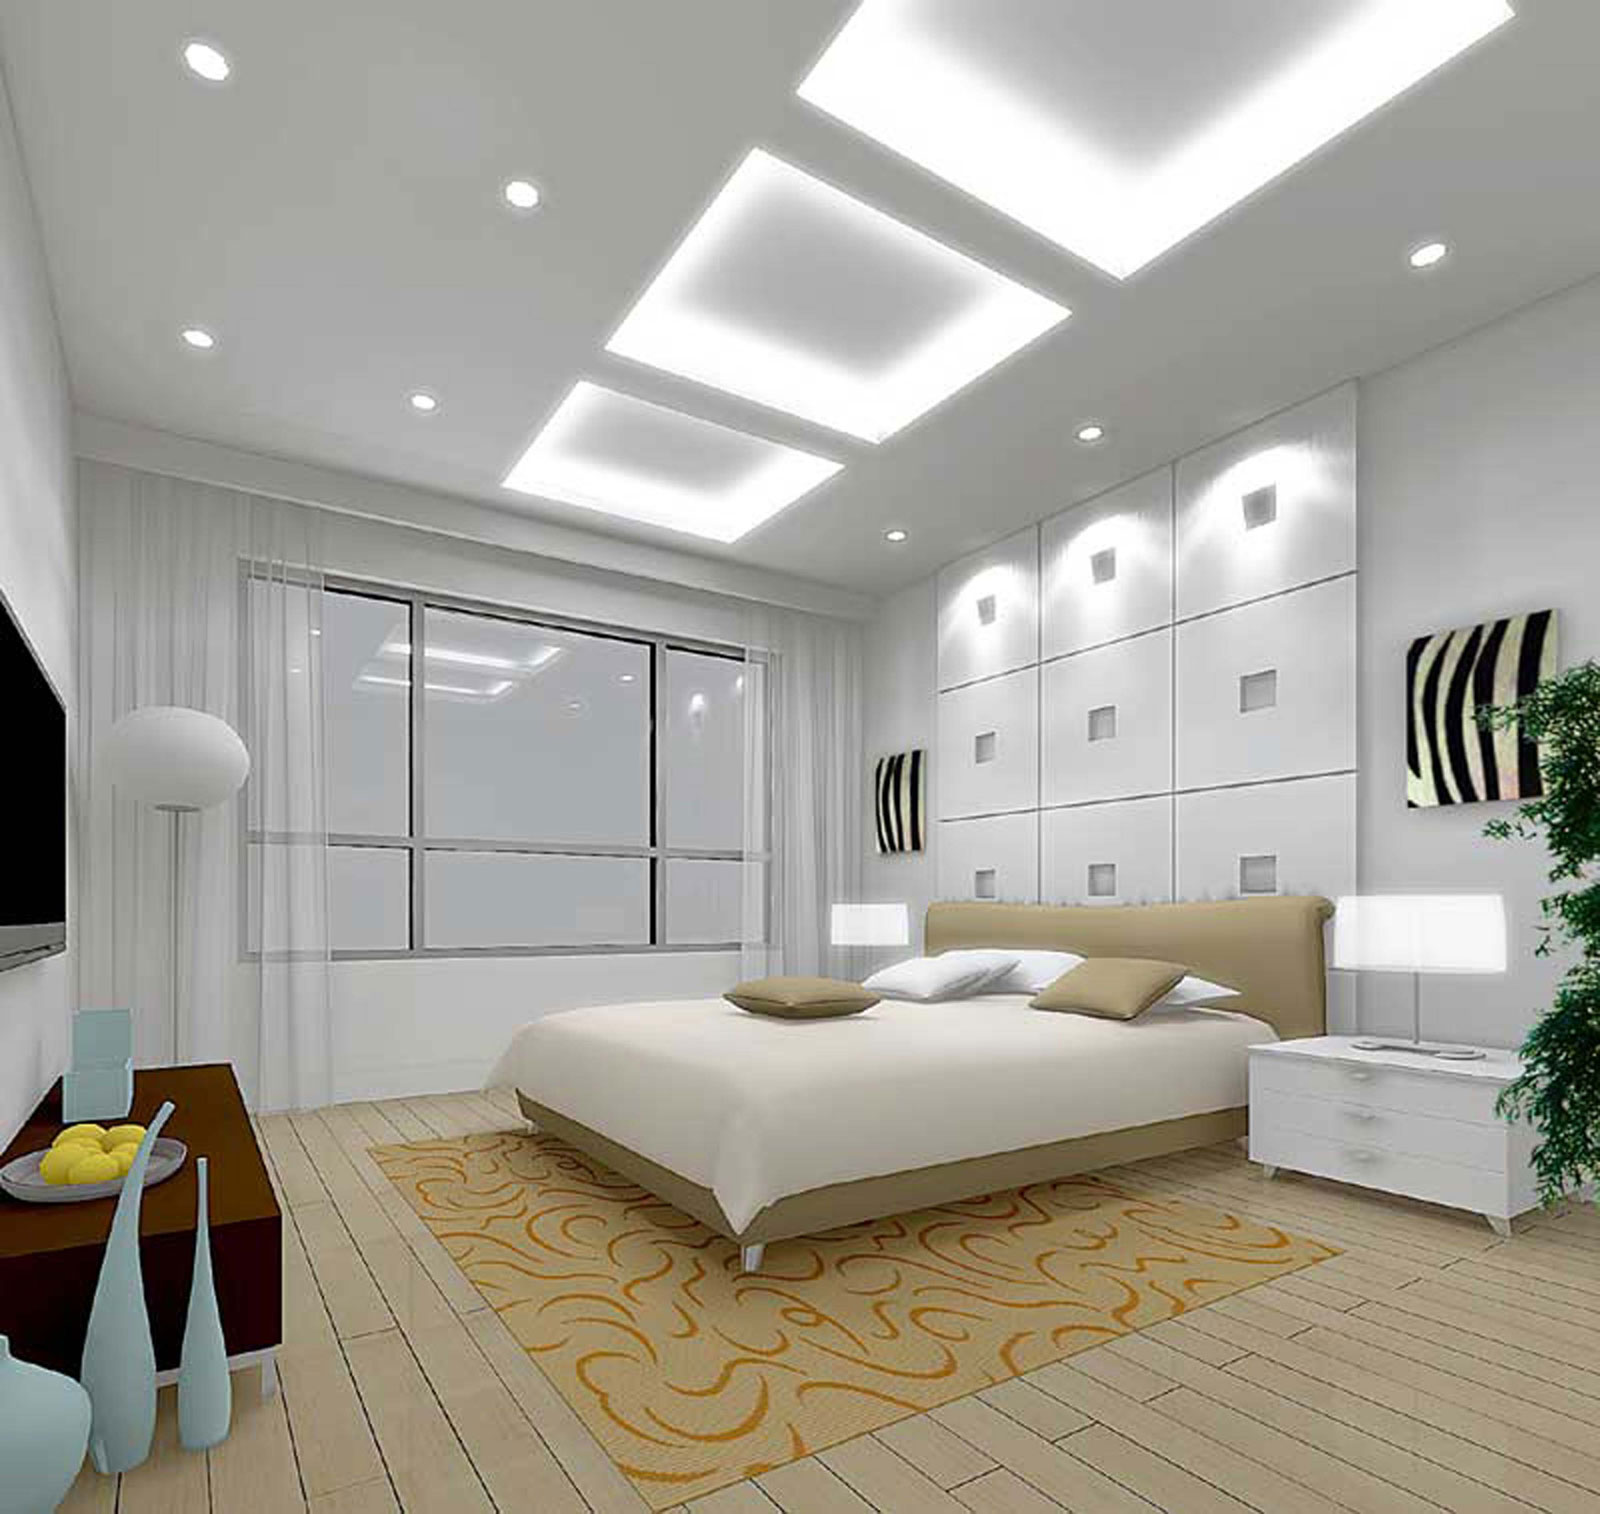 Bedroom Interior With Minimalist Bedroom Interior Design Decorated With Modern Style Using White Furniture And Modern Ceiling Lights Interior Design Modern Ceiling Lights With Hanged Pendant Fixtures And Curved Contemporary Style Lighting